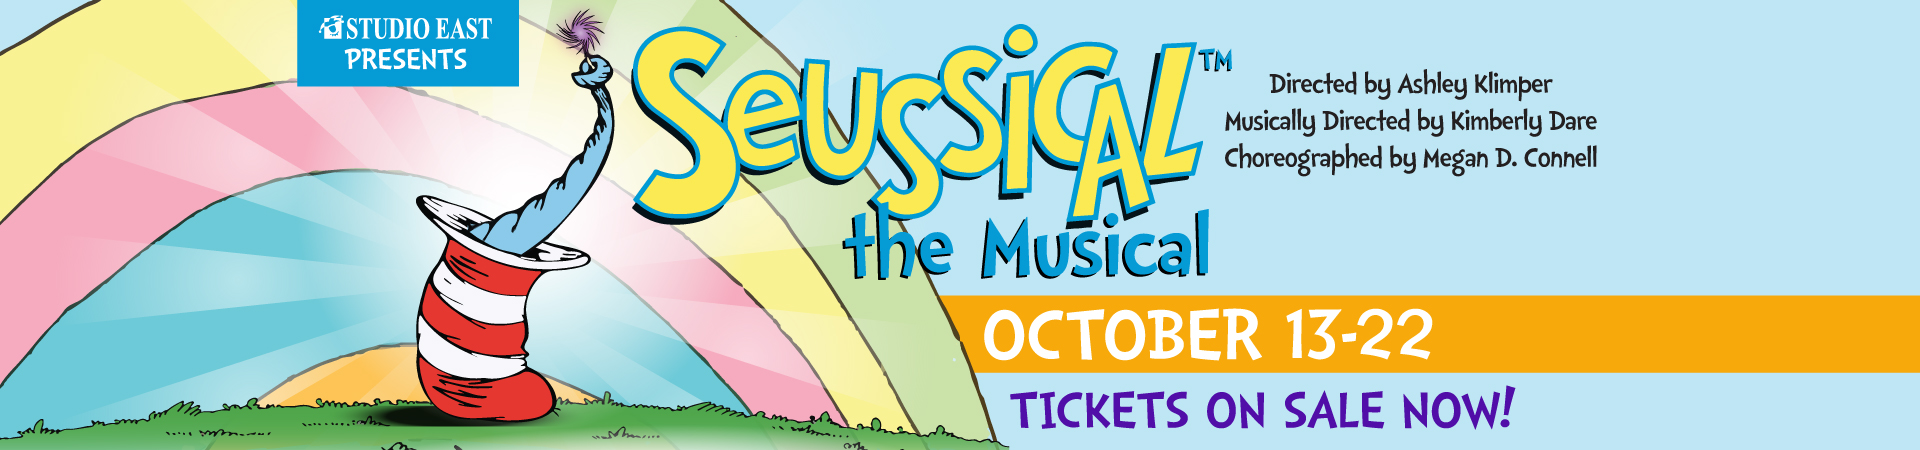 on’t Miss Seussical, the Musical™, Your Ticket to Fun for All Ages: Live on Stage this October at Studio East, Your Premier Events Playhouse in Kirkland, WA Music by Stephen Flaherty | Lyrics by Lynn Ahrens Book by Lynn Ahrens & Stephen Flaherty | Based on the Works of Dr. Seuss Co-conceived by Lynn Ahrens, Stephen Flaherty, and Eric Idle Directed by Ashley Klimper | Music Directed by Kim Dare | Choreographed by Megan D. Connell